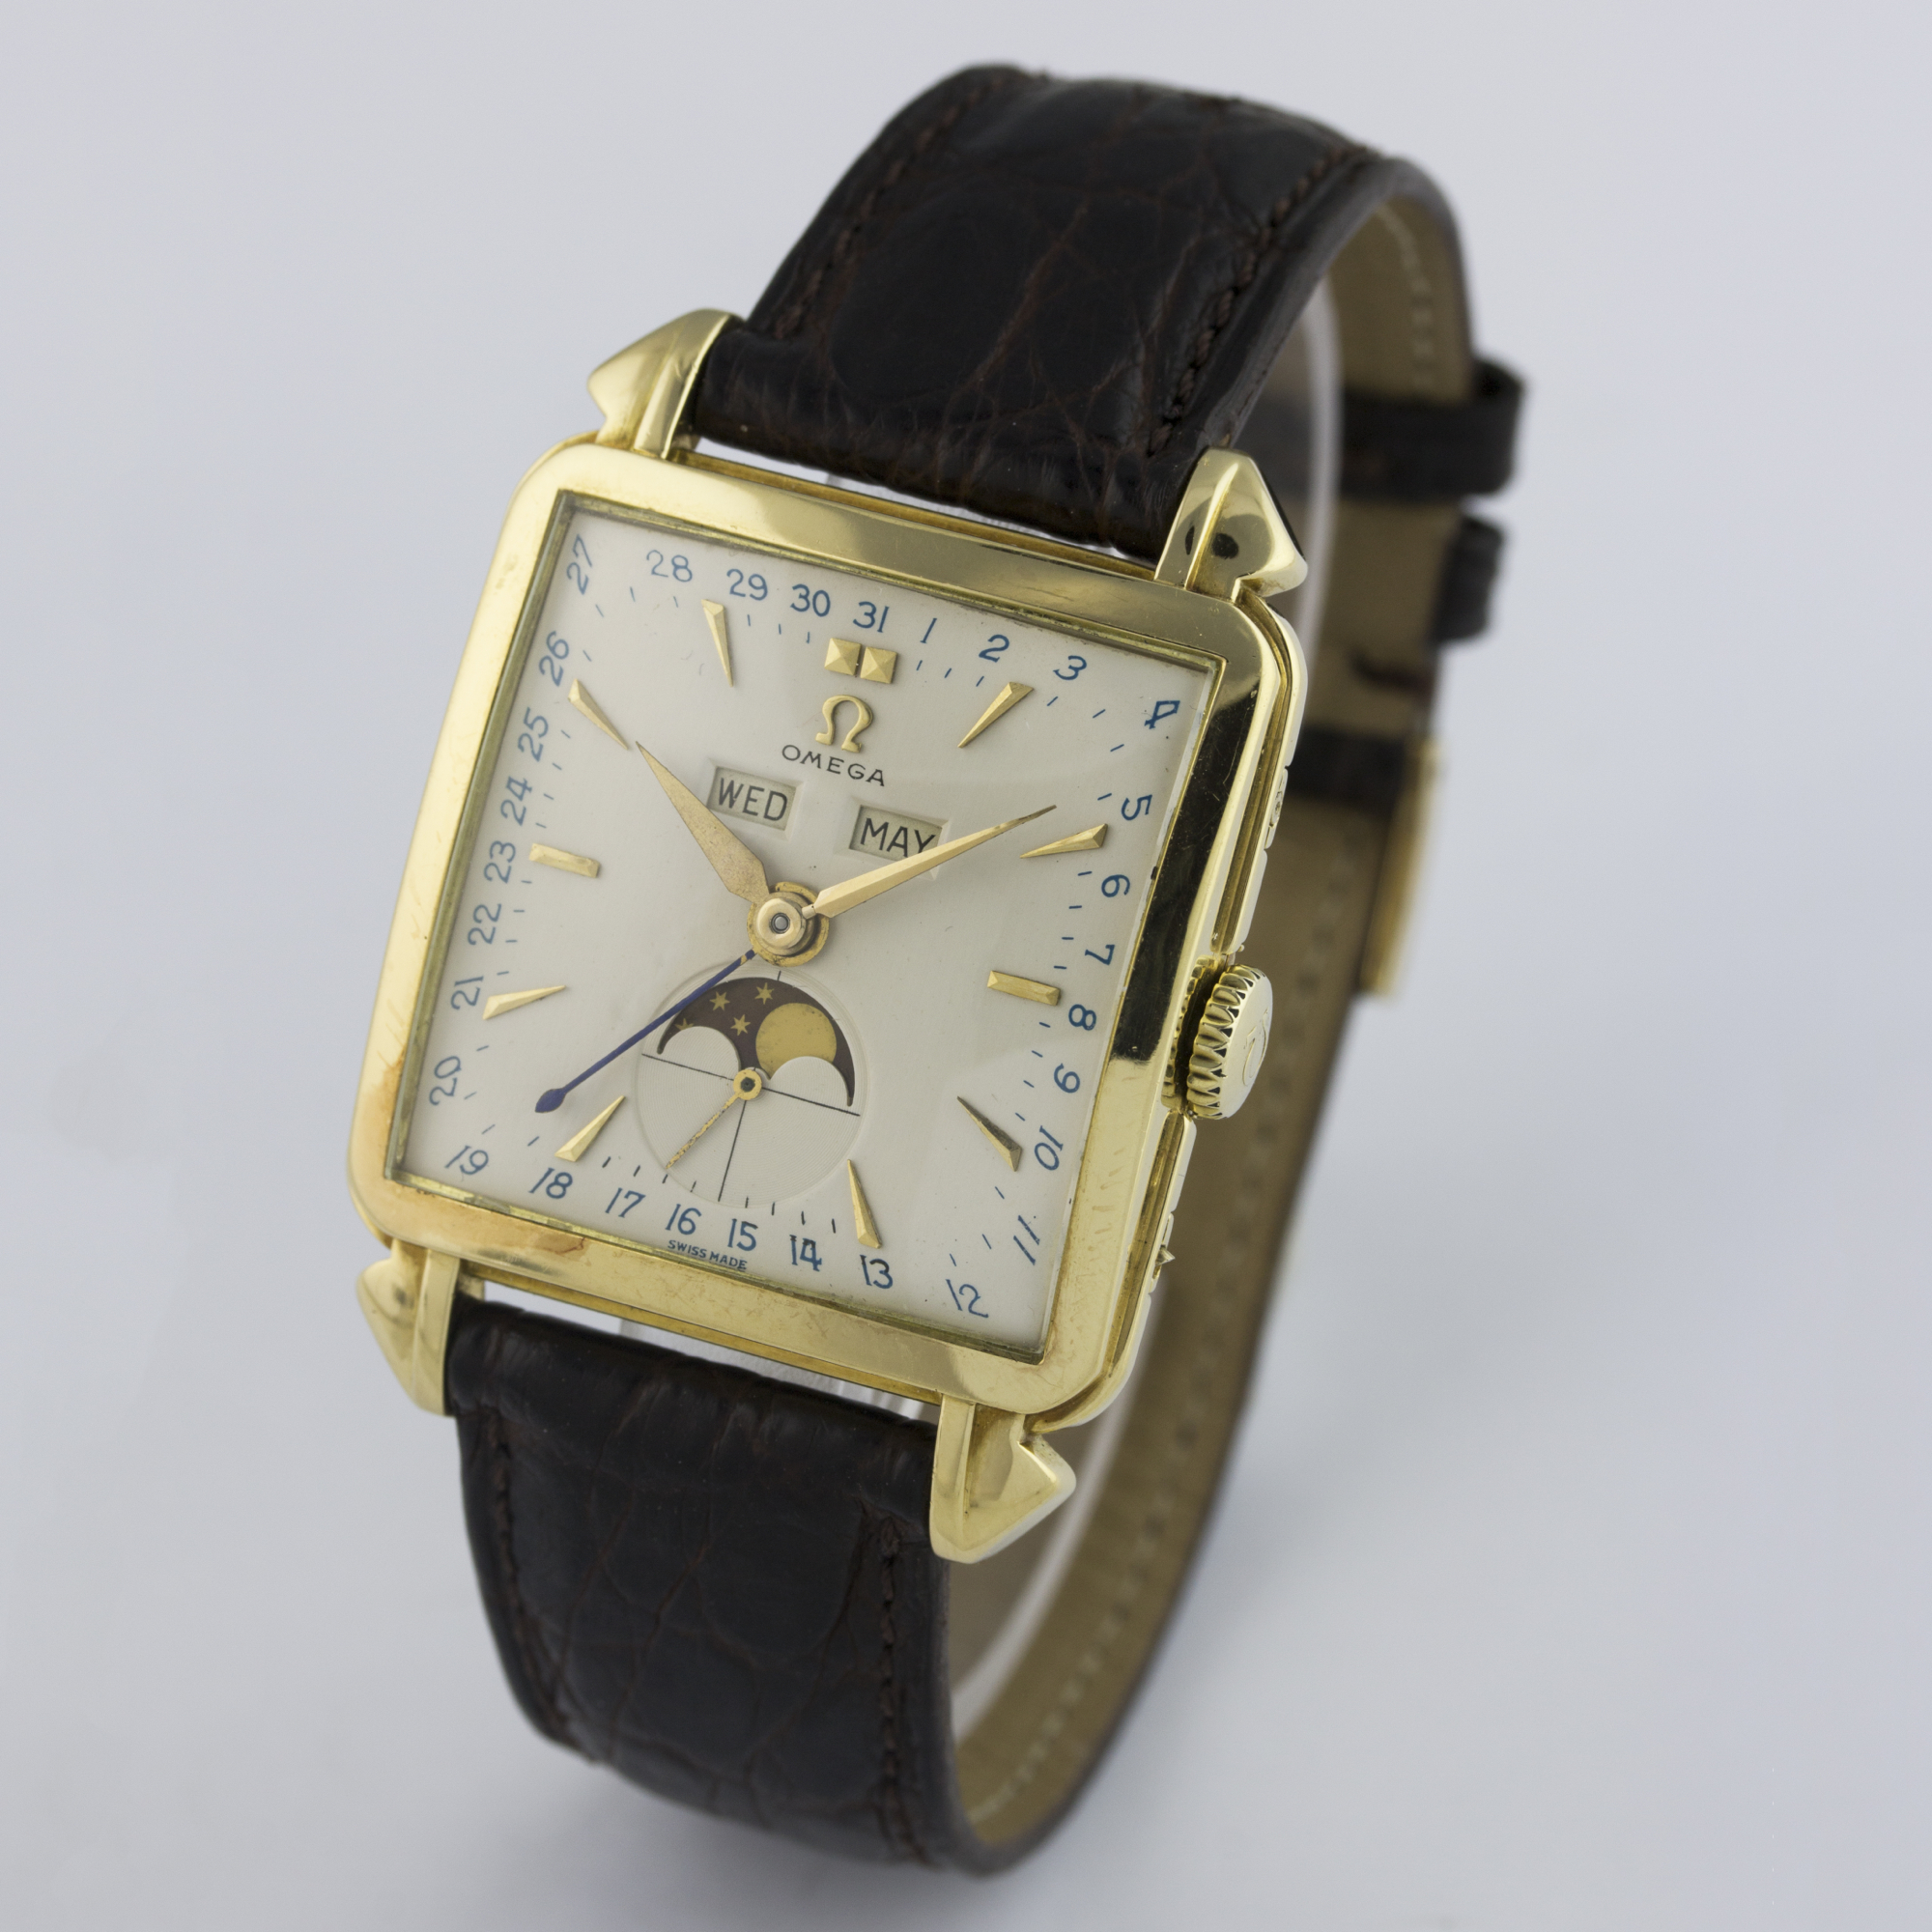 A RARE GENTLEMAN'S 18K SOLID GOLD OMEGA COSMIC MOONPHASE TRIPLE CALENDAR WRIST WATCH CIRCA 1951 D: - Image 4 of 9